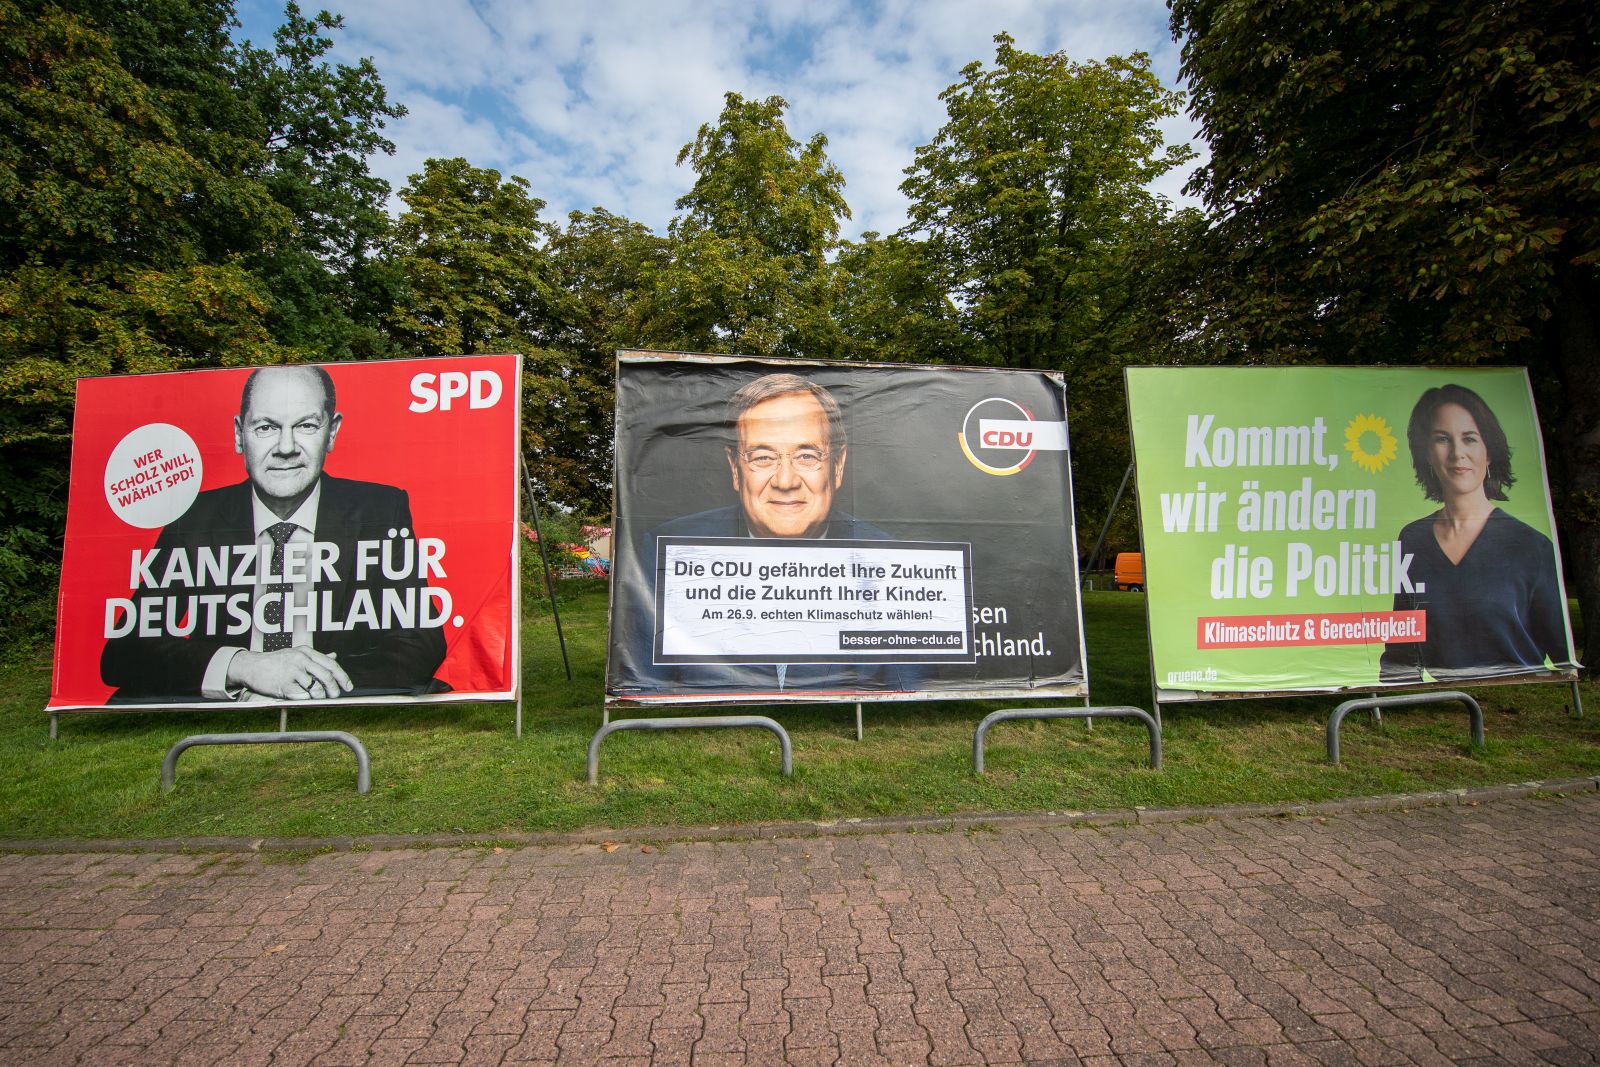 epa09473026 Large election placards of the three leading candidates in the German federal elections (L-R) Olaf Scholz of the Social Democratic Party (SPD), Armin Laschet of the Christian Democratic Union (CDU) and Annalena Baerbock of the Green Party (Buendnis 90/Die Gruenen) in Frankfurt am Main, Germany, 17 September 2021. An anti-CDU sticker was posted on the placard showing Laschet. Germany will hold general elections oon 26 September 2021.  EPA/Constantin Zinn